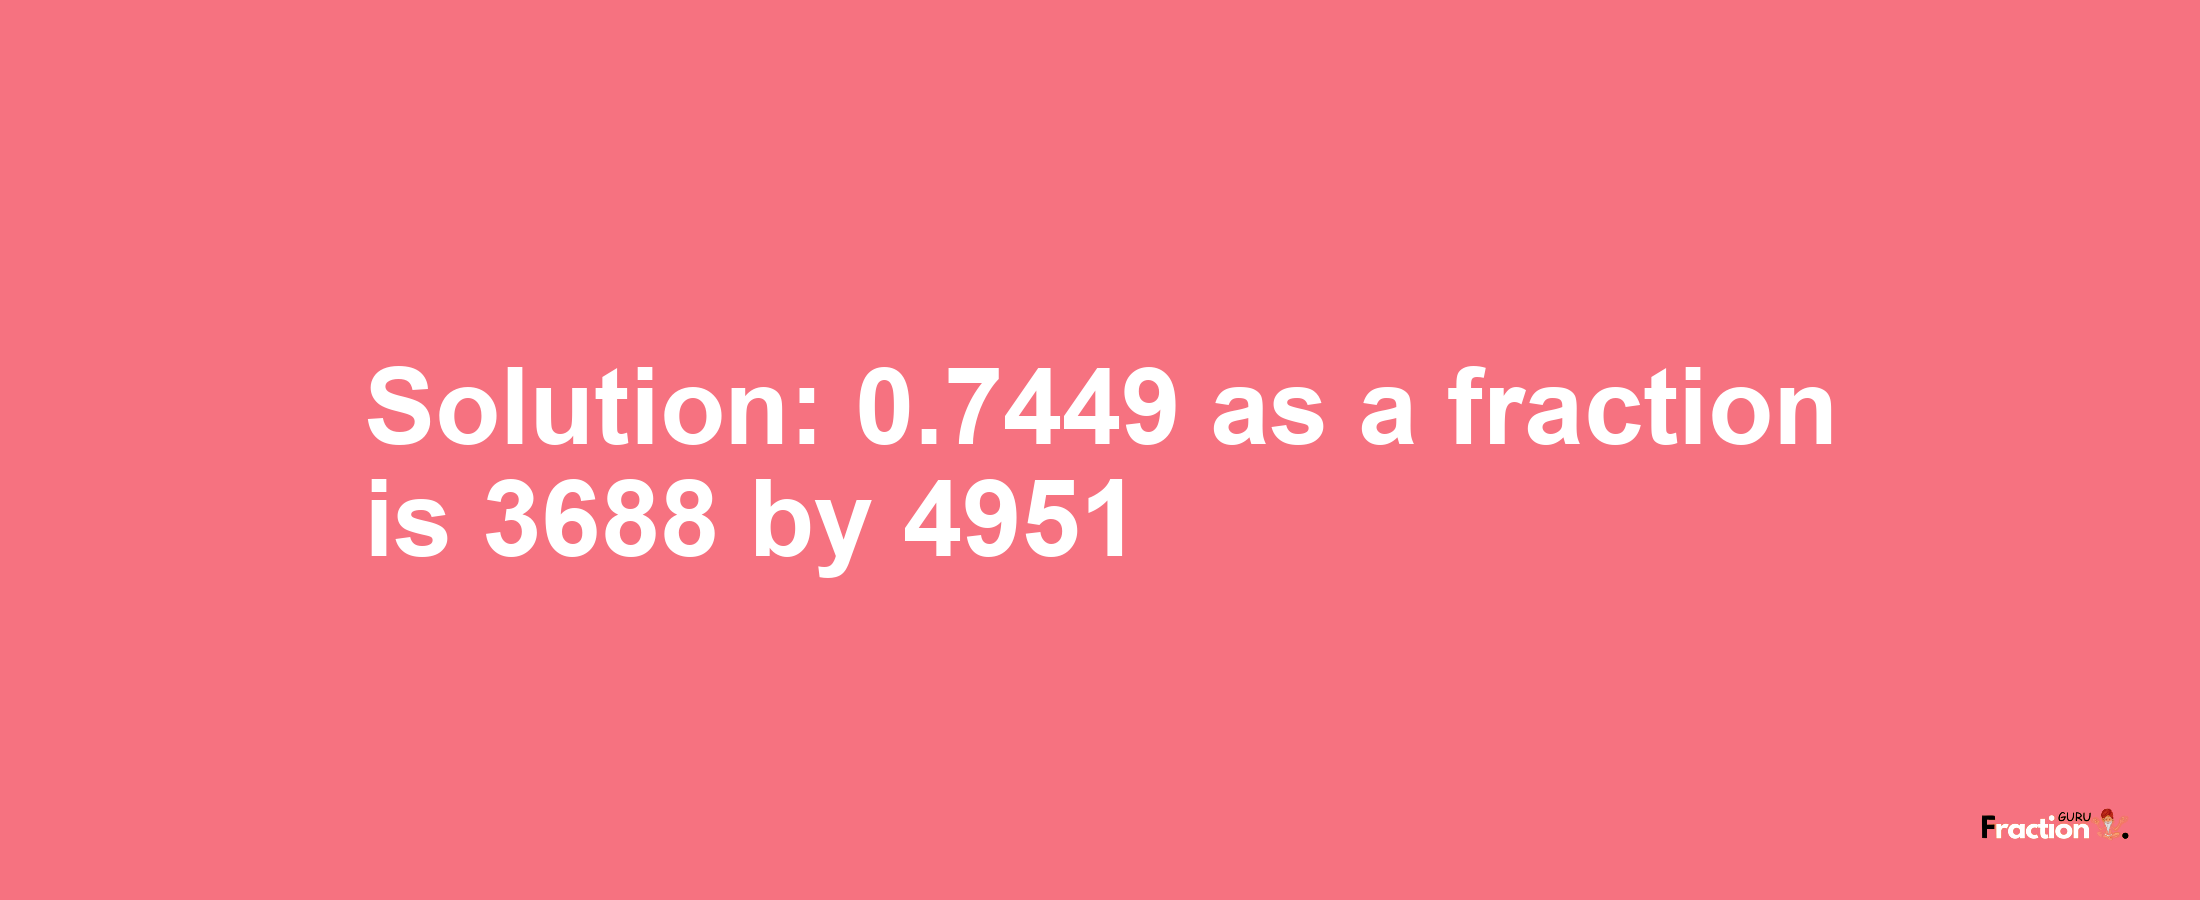 Solution:0.7449 as a fraction is 3688/4951